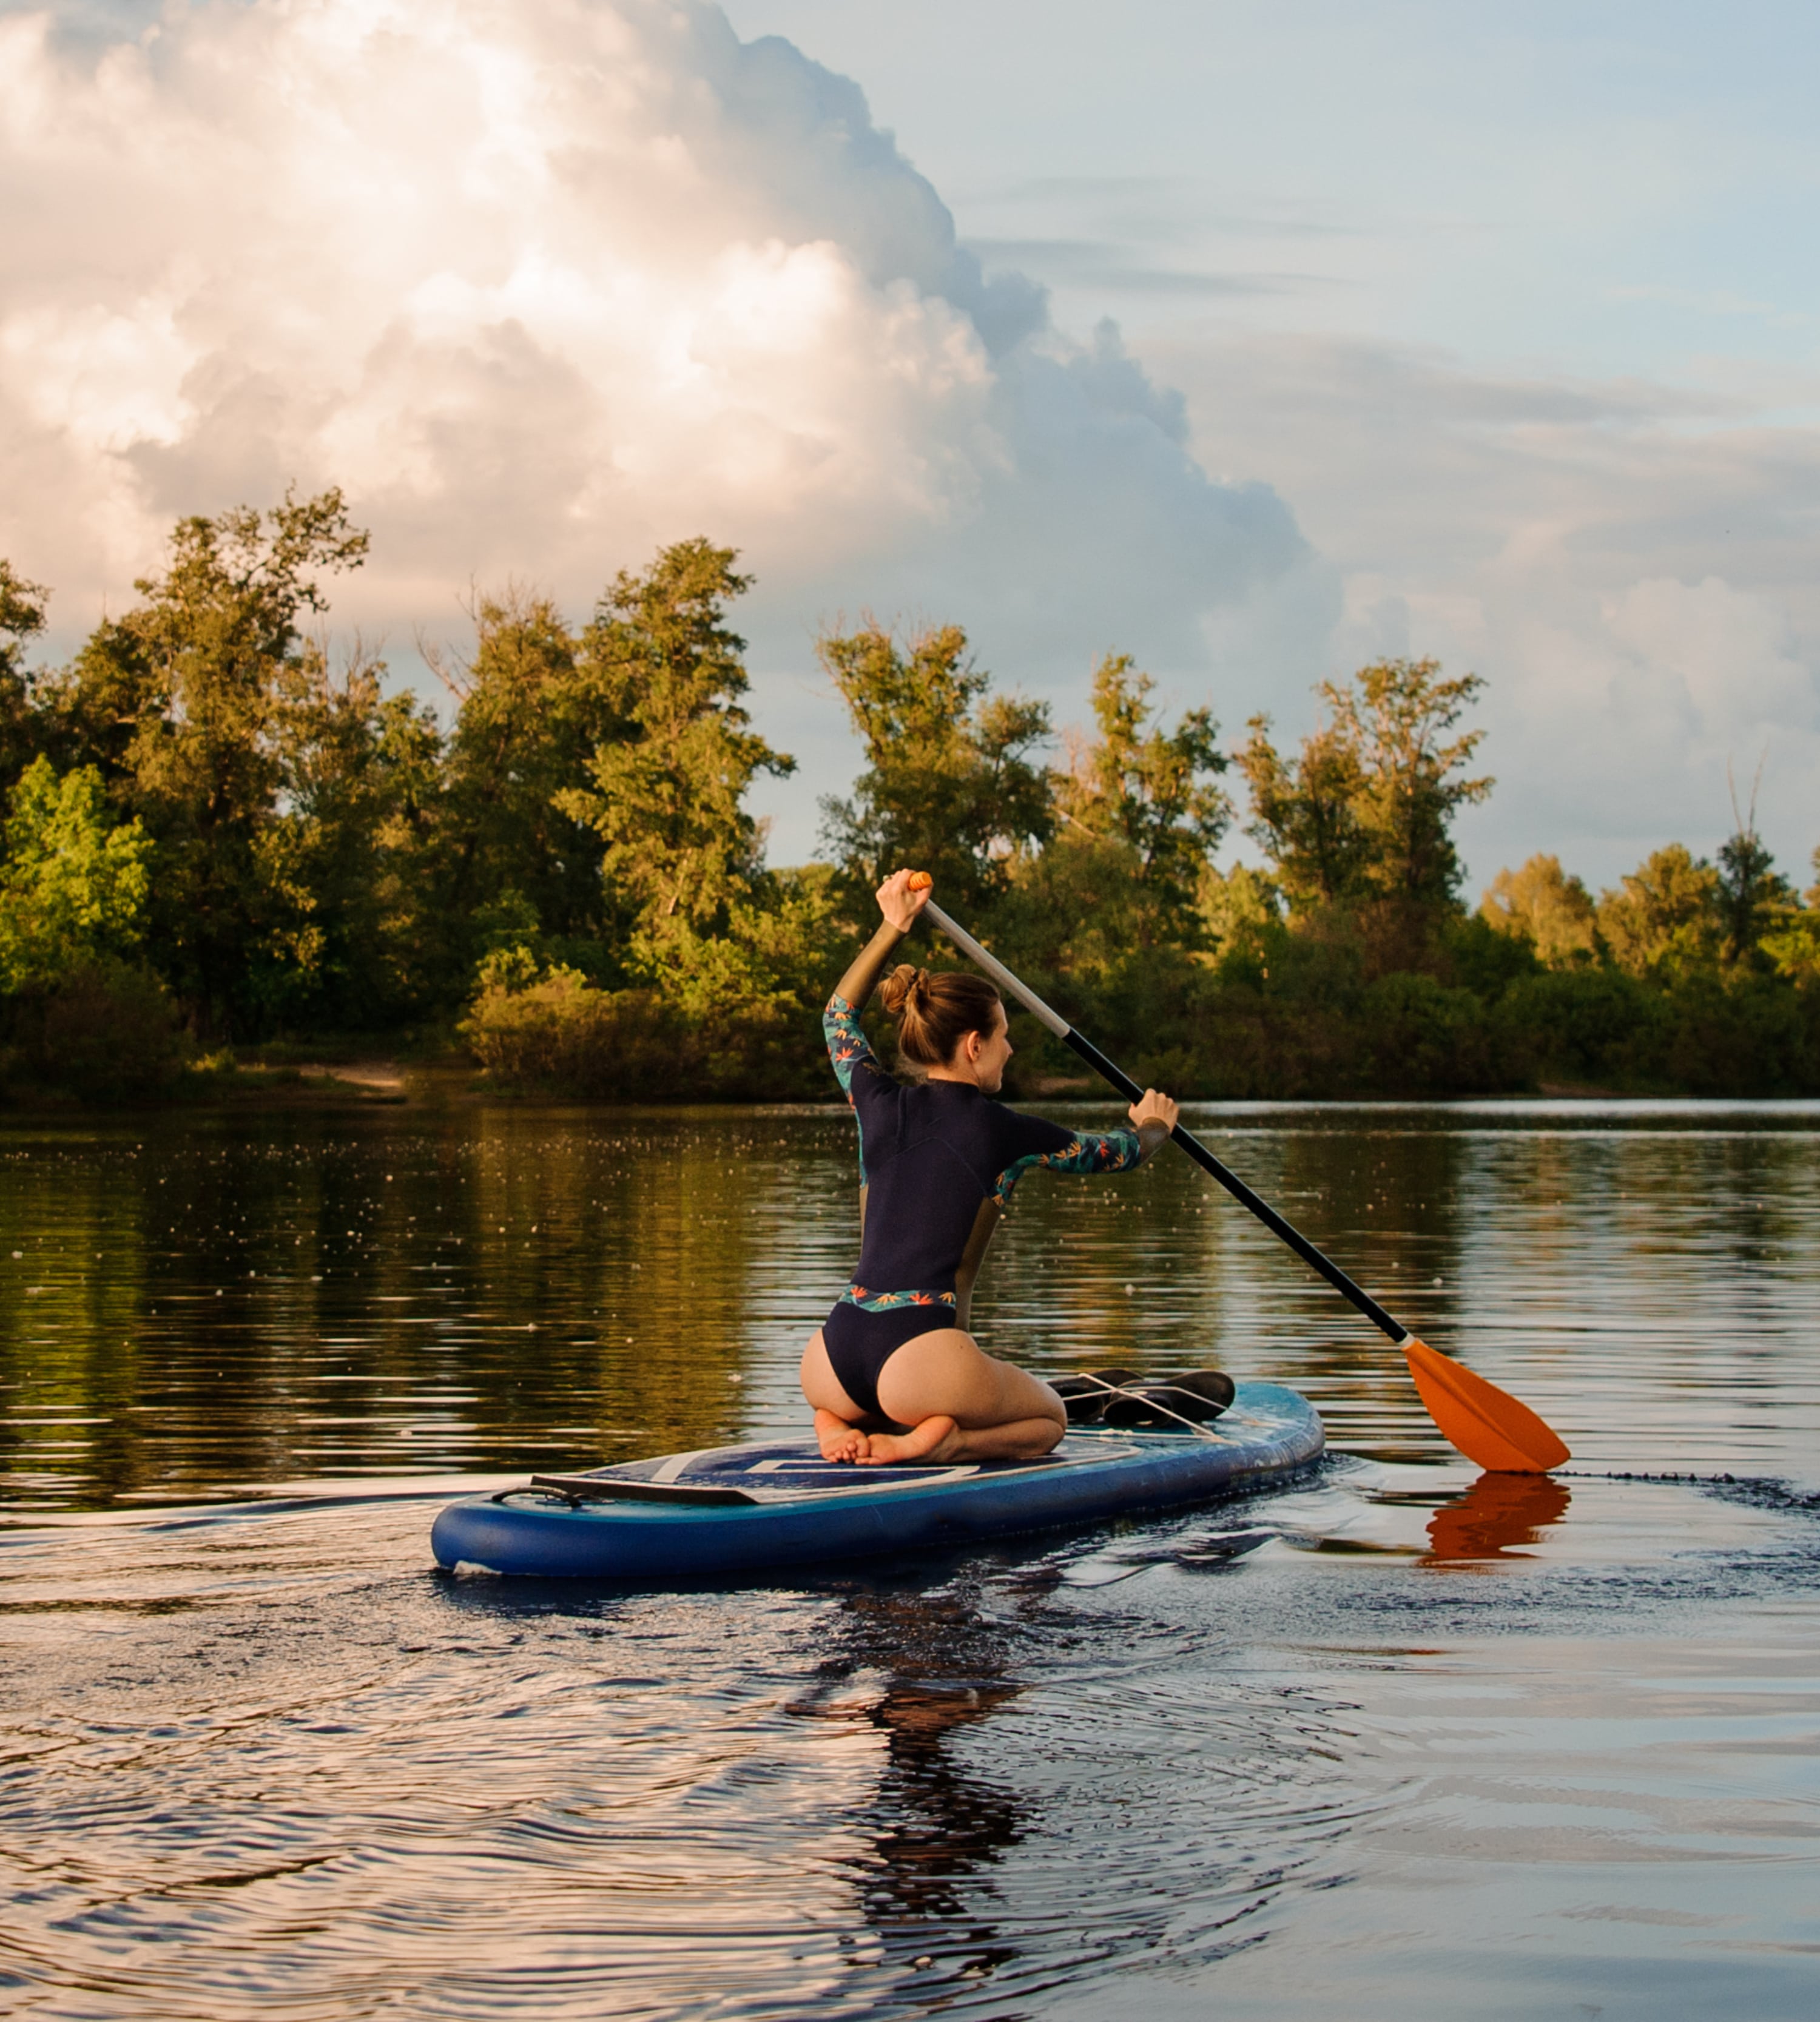 SUP and Canoe: 5 Hot Trends in Water Sports